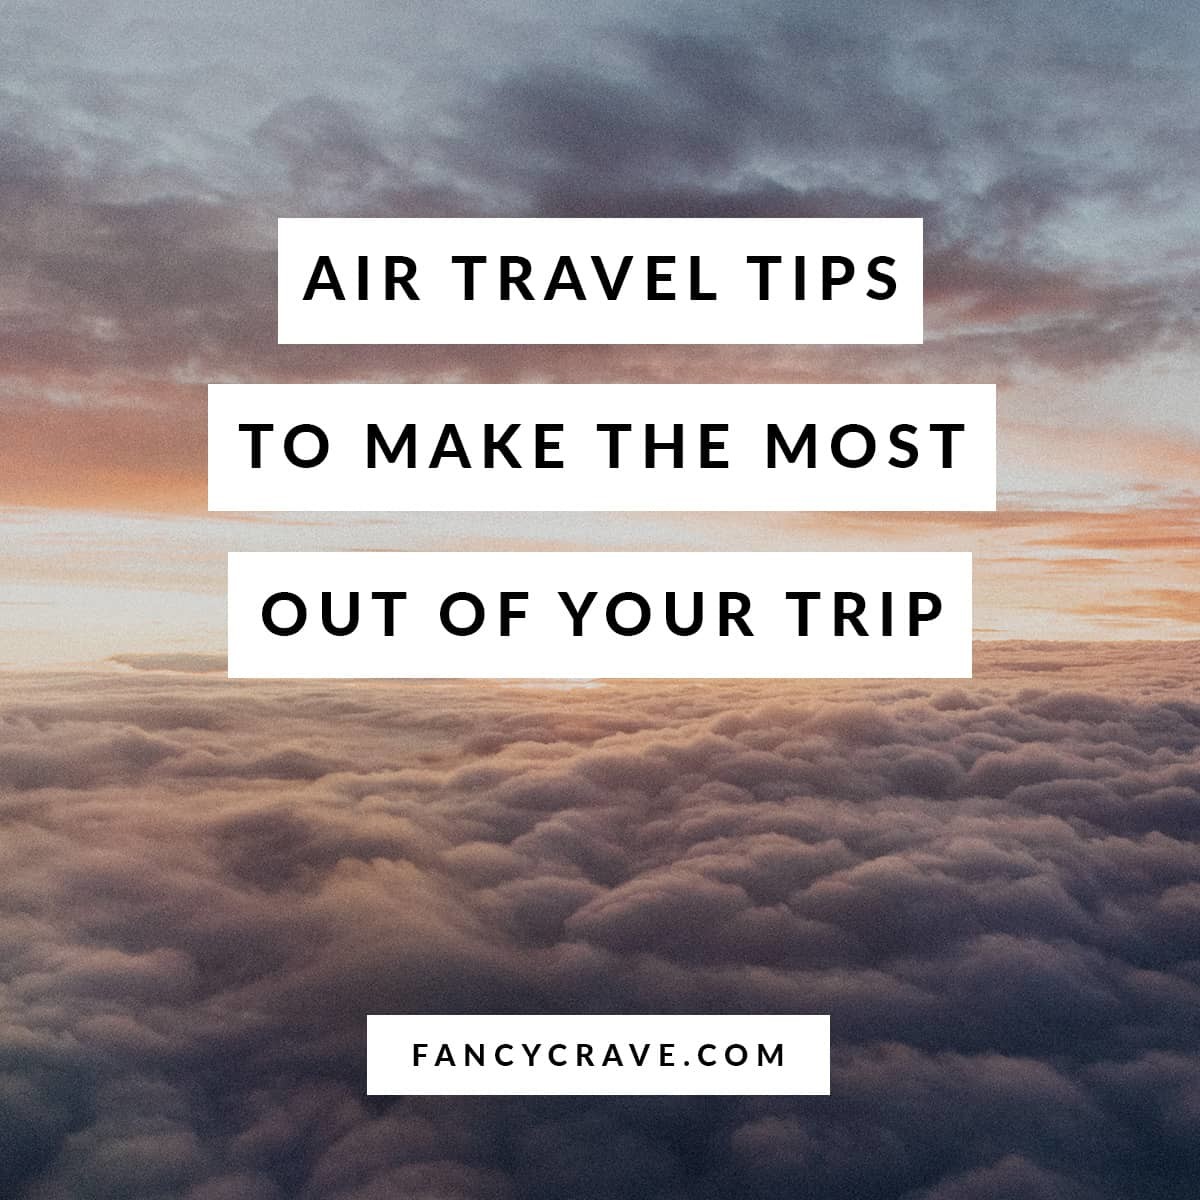 Air Travel Tips to Make the Most Out of Your Trip